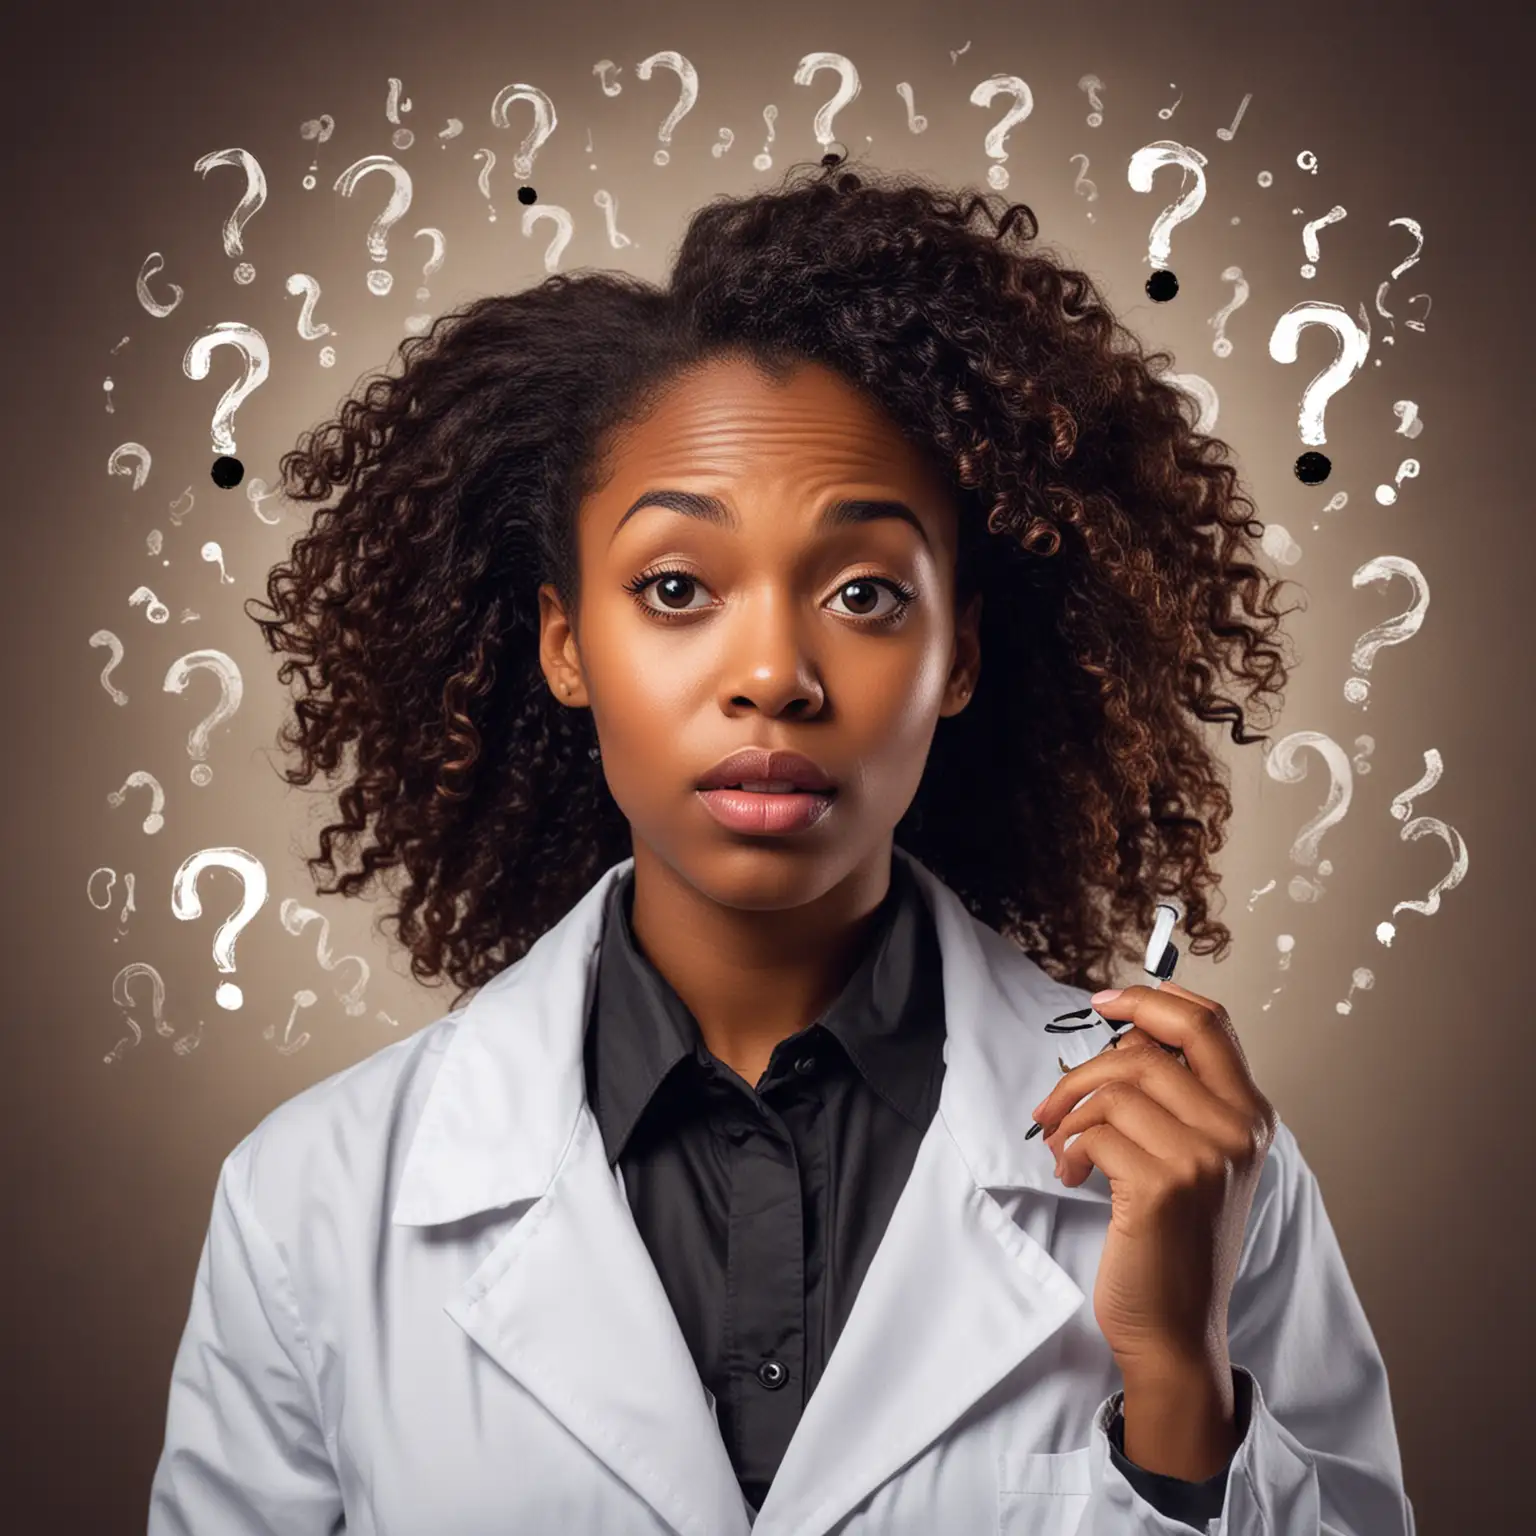 Confused African American Woman Perfumer in Lab Coat with Question Marks